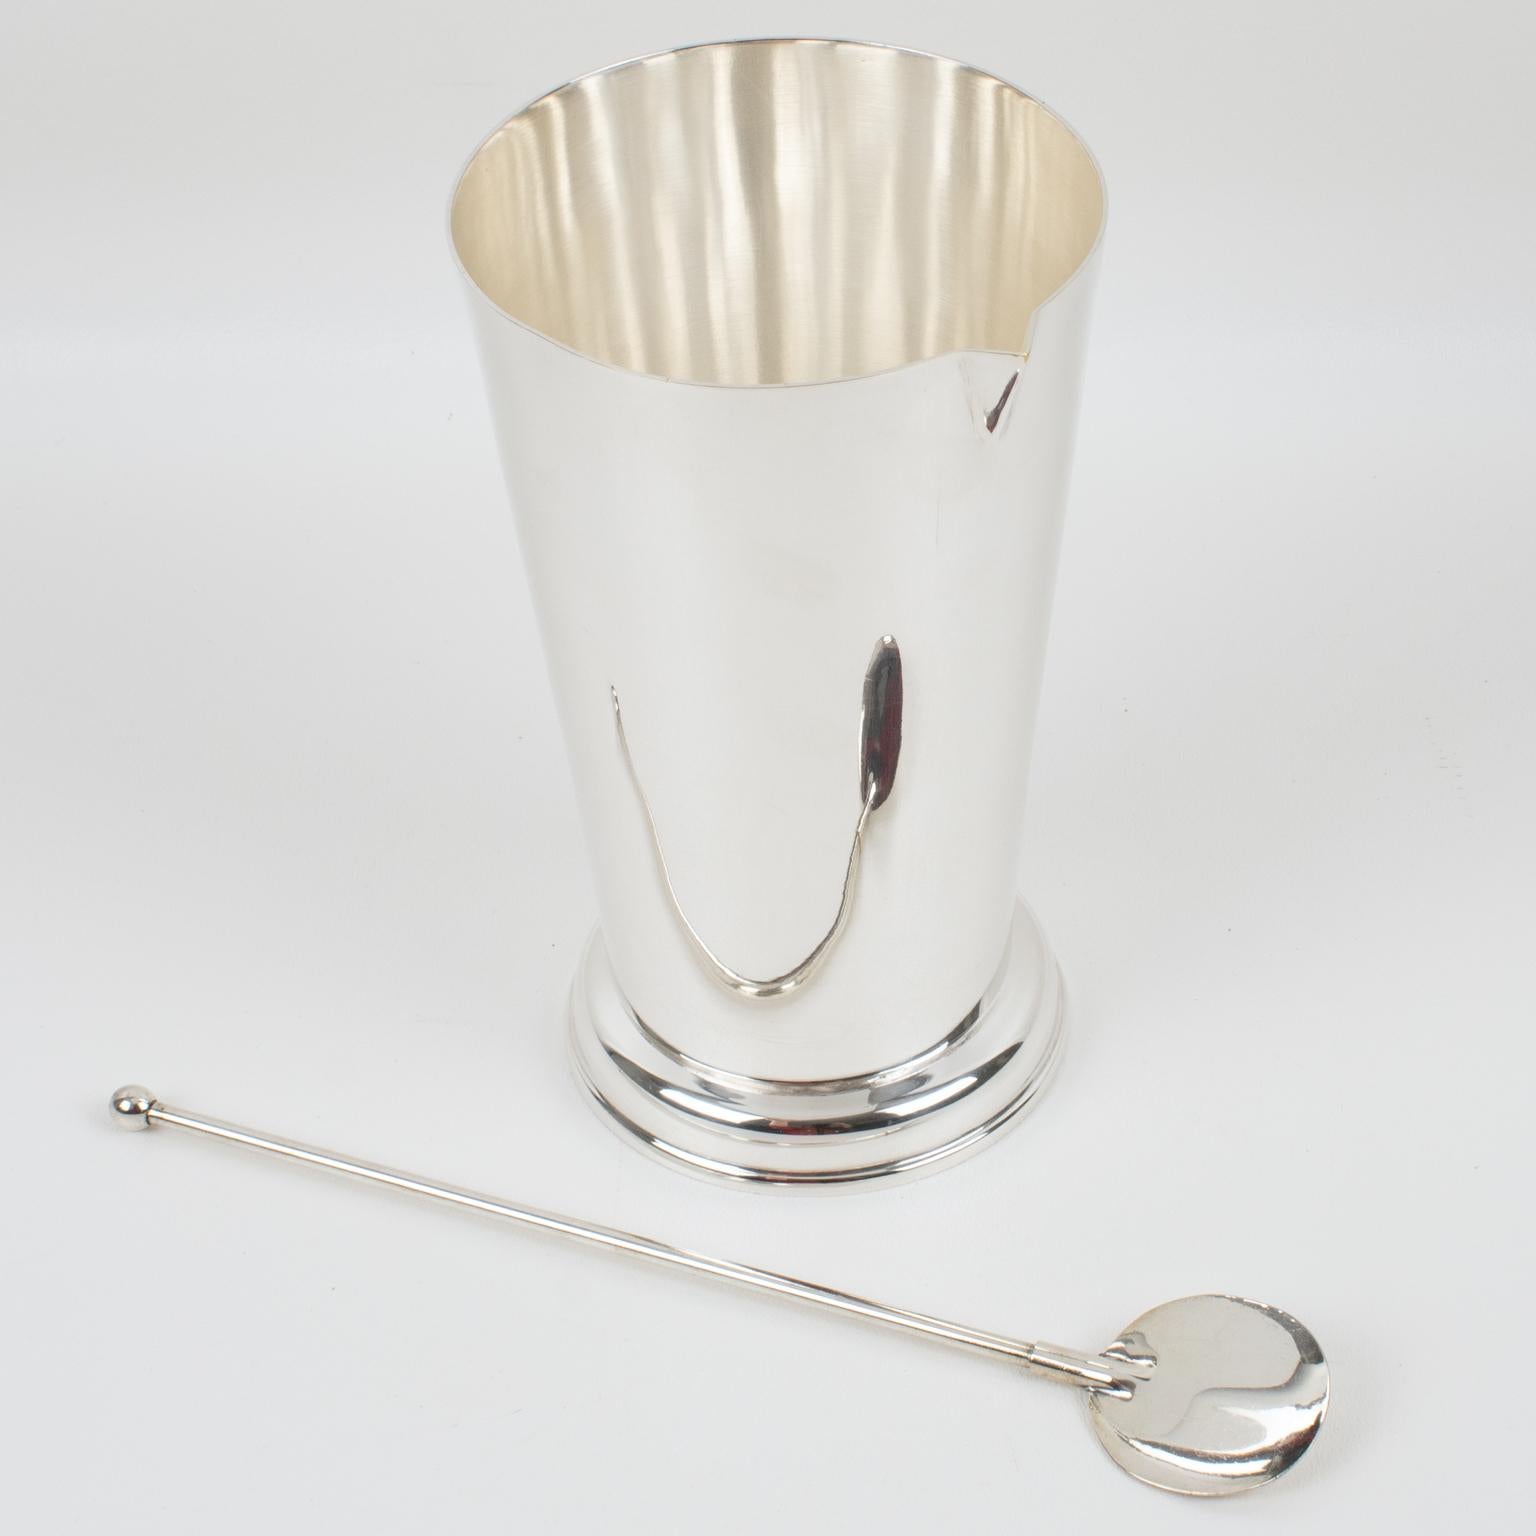 French Art Deco Silver Plate Barware Cocktail Martini Pitcher by Produx Paris